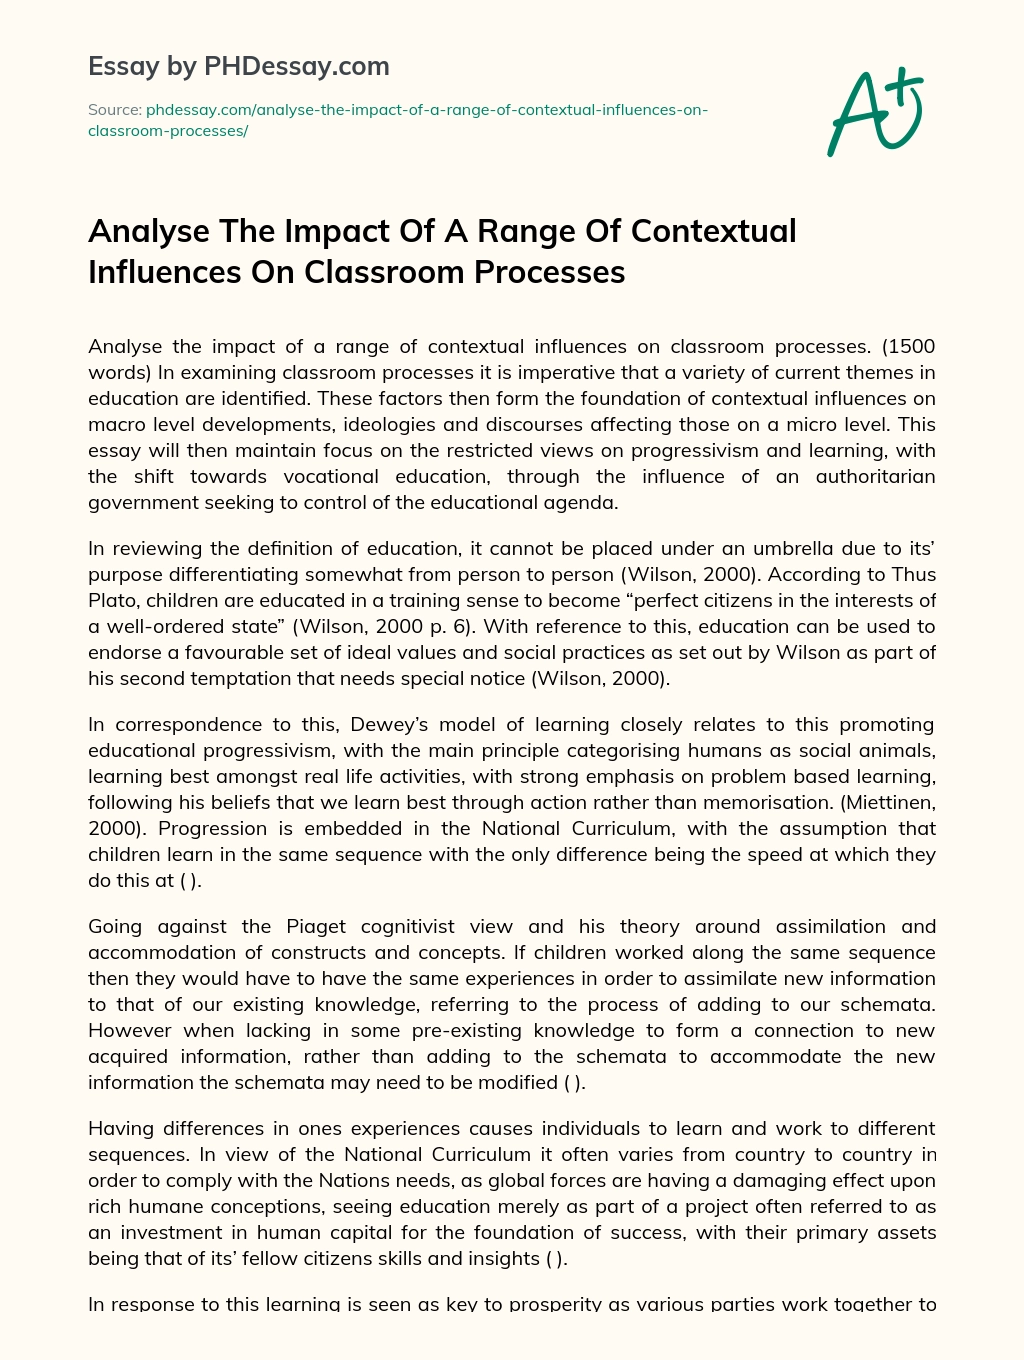 Analyse The Impact Of A Range Of Contextual Influences On Classroom Processes essay